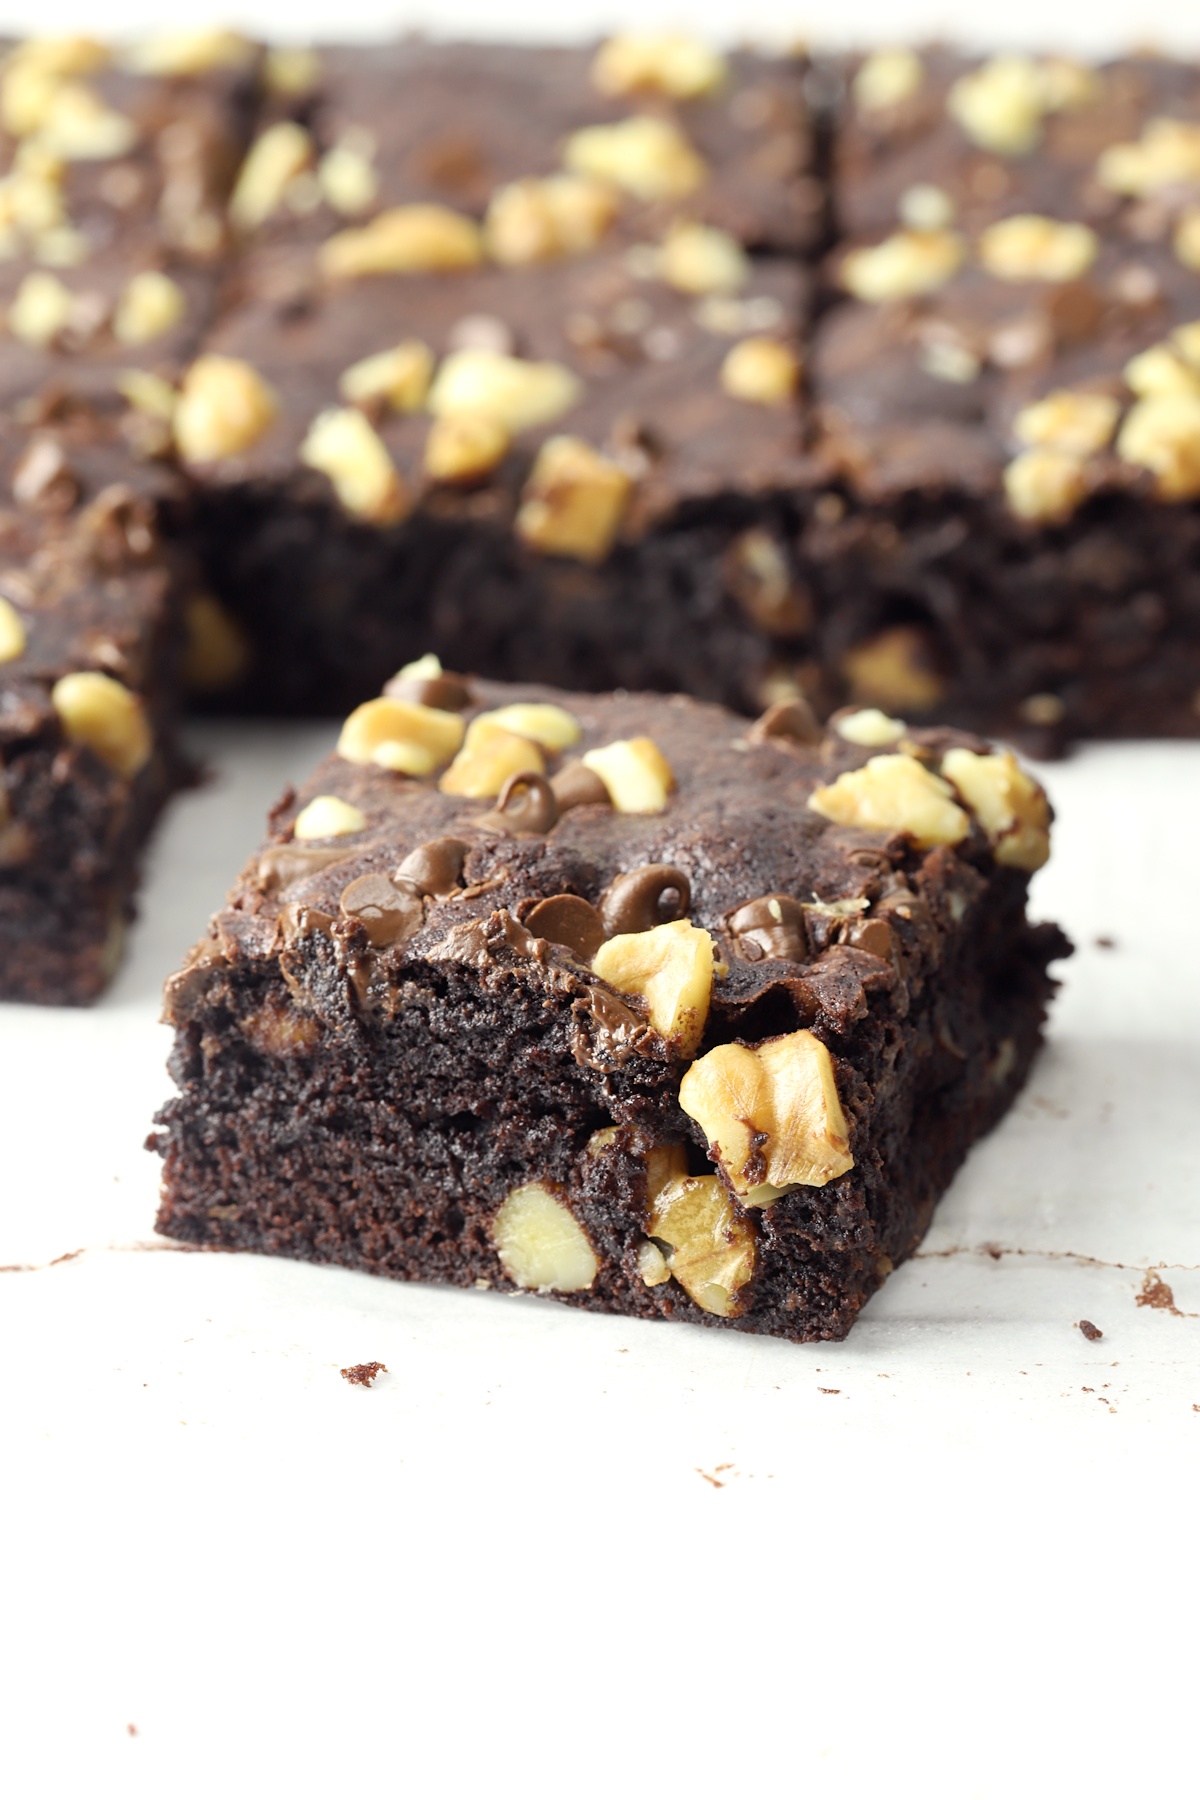 A brownie filled with walnuts.